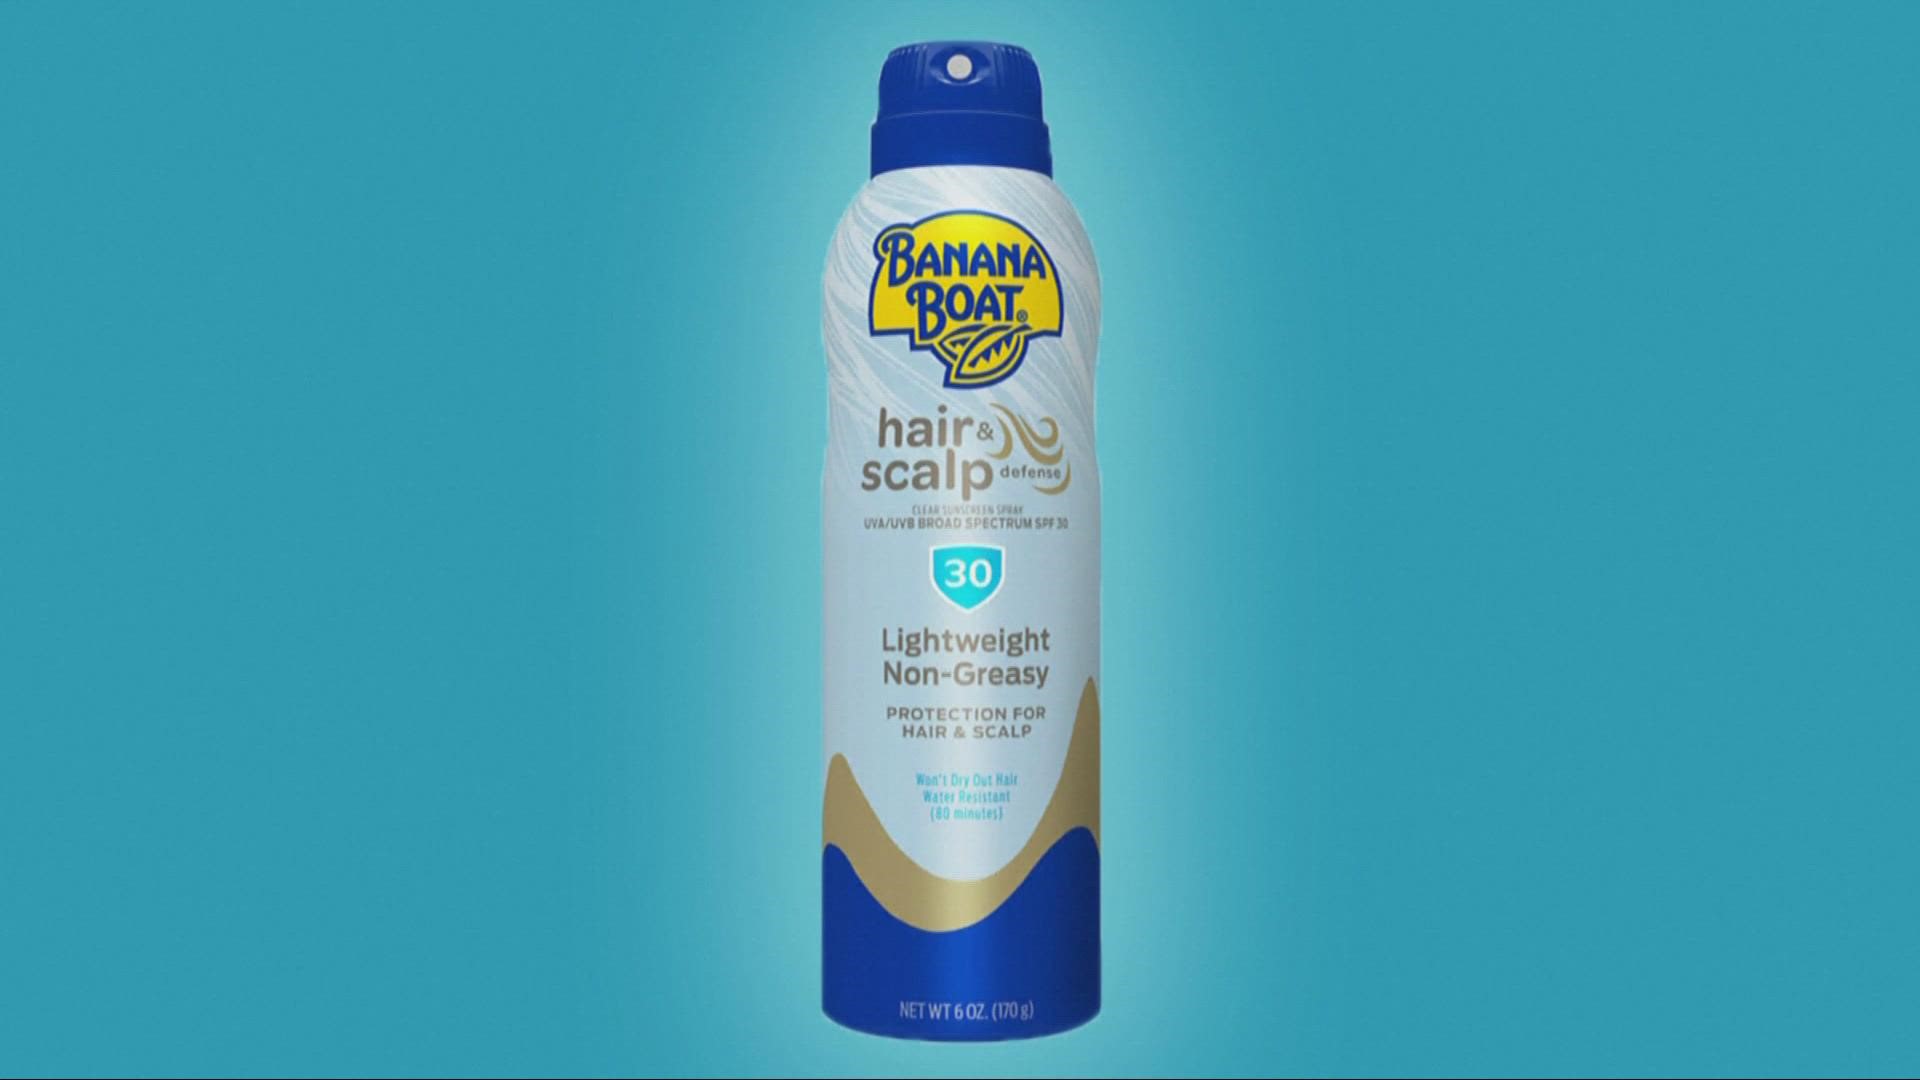 The company behind Banana Boat sunscreen issued a voluntary, nationwide recall for the brand's Hair & Scalp Sunscreen Spray SPF 30.